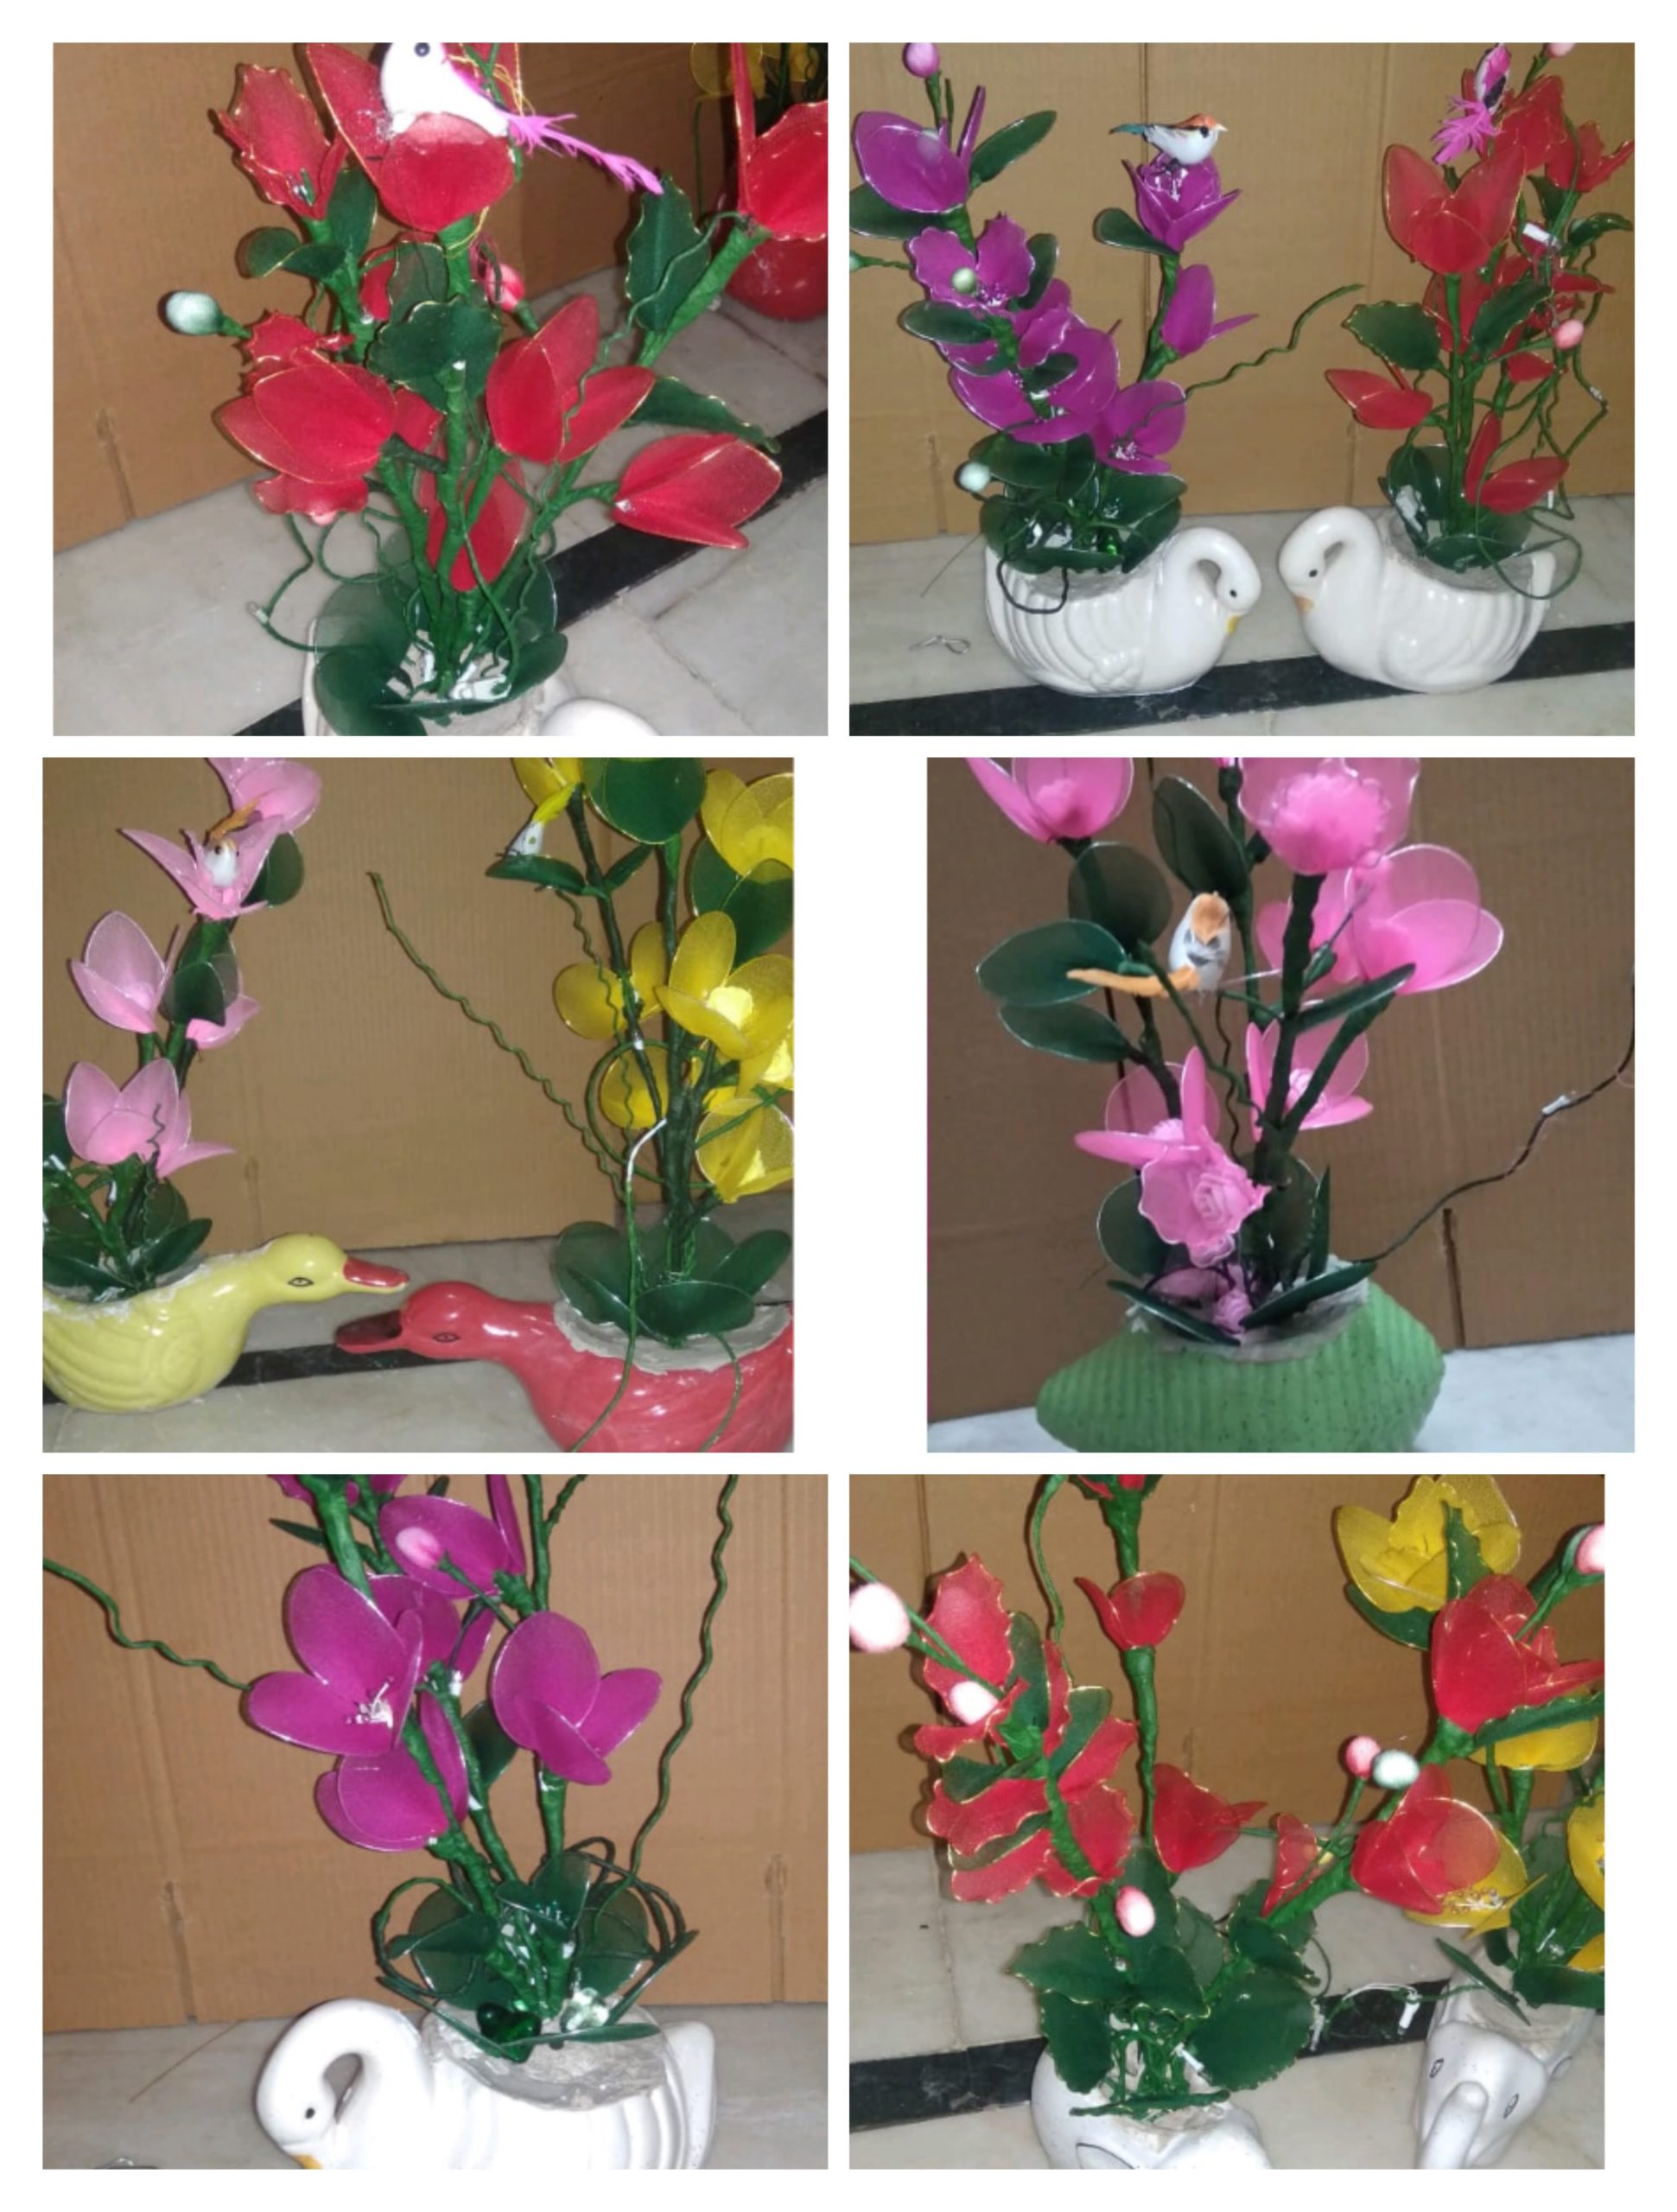 Nylon flowers (stocking flowers) Collections